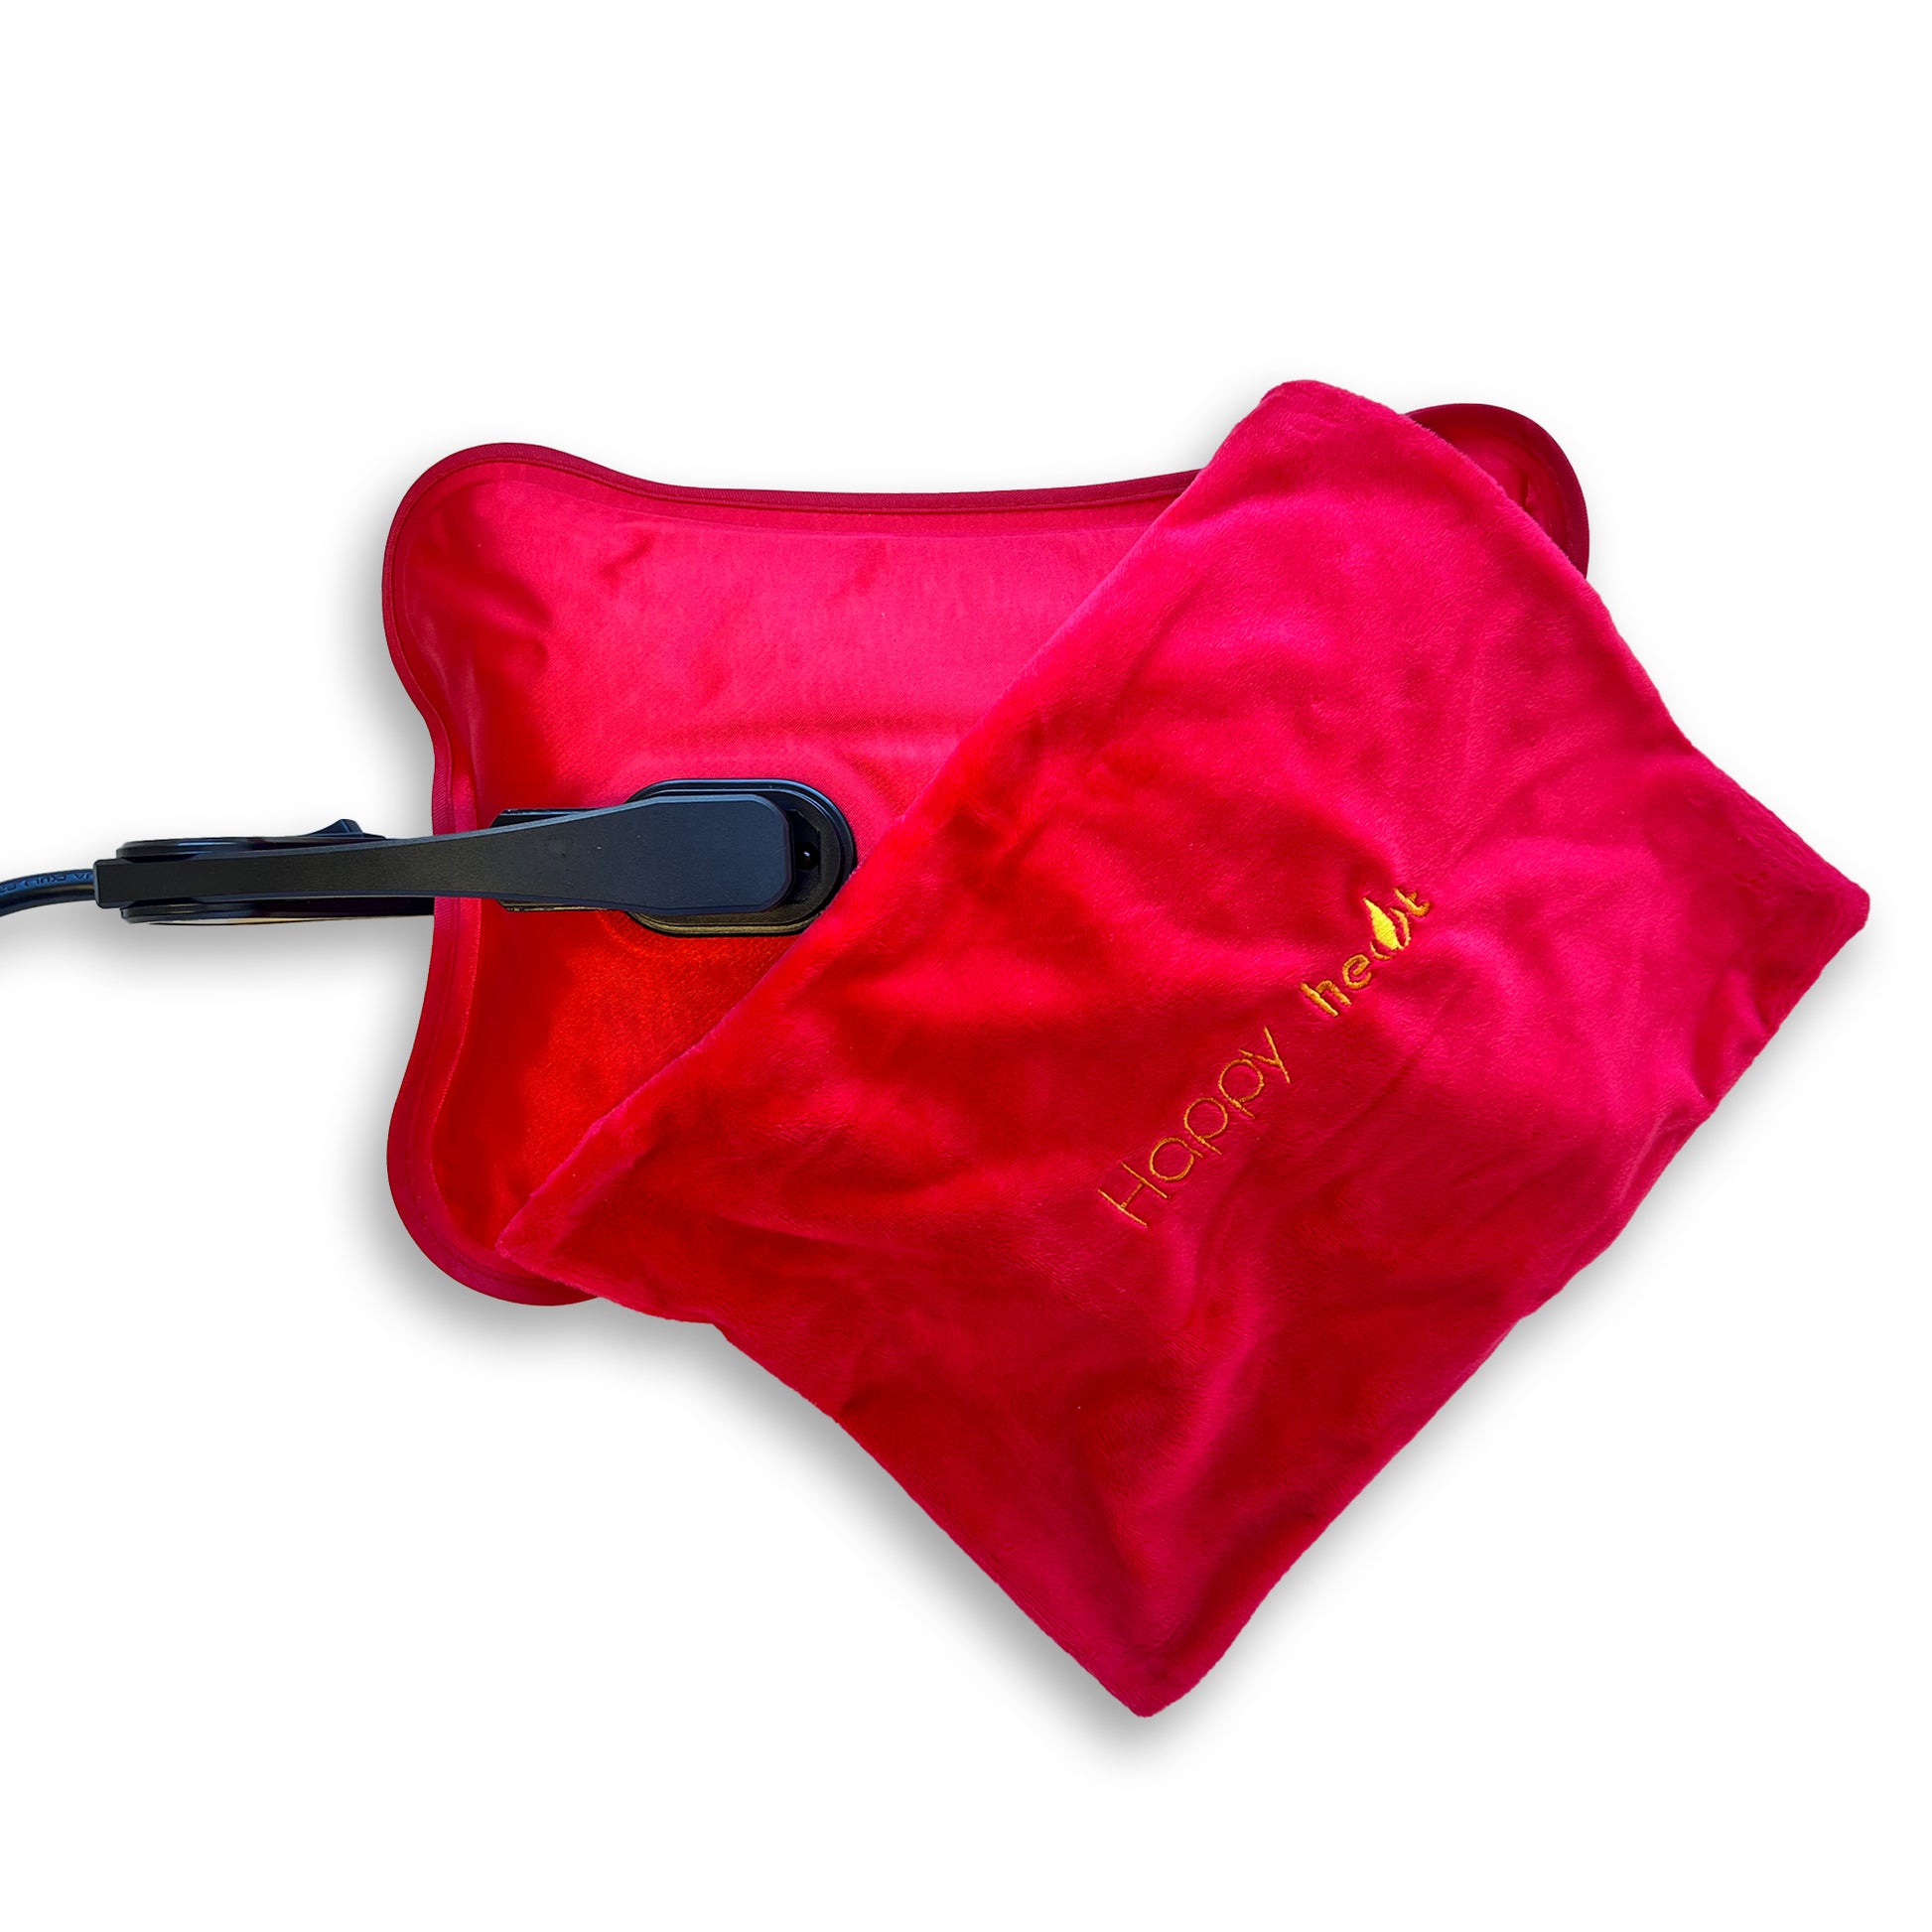 Rechargeable Electric Hot Water Bottle - Electric Hot Water Bottle